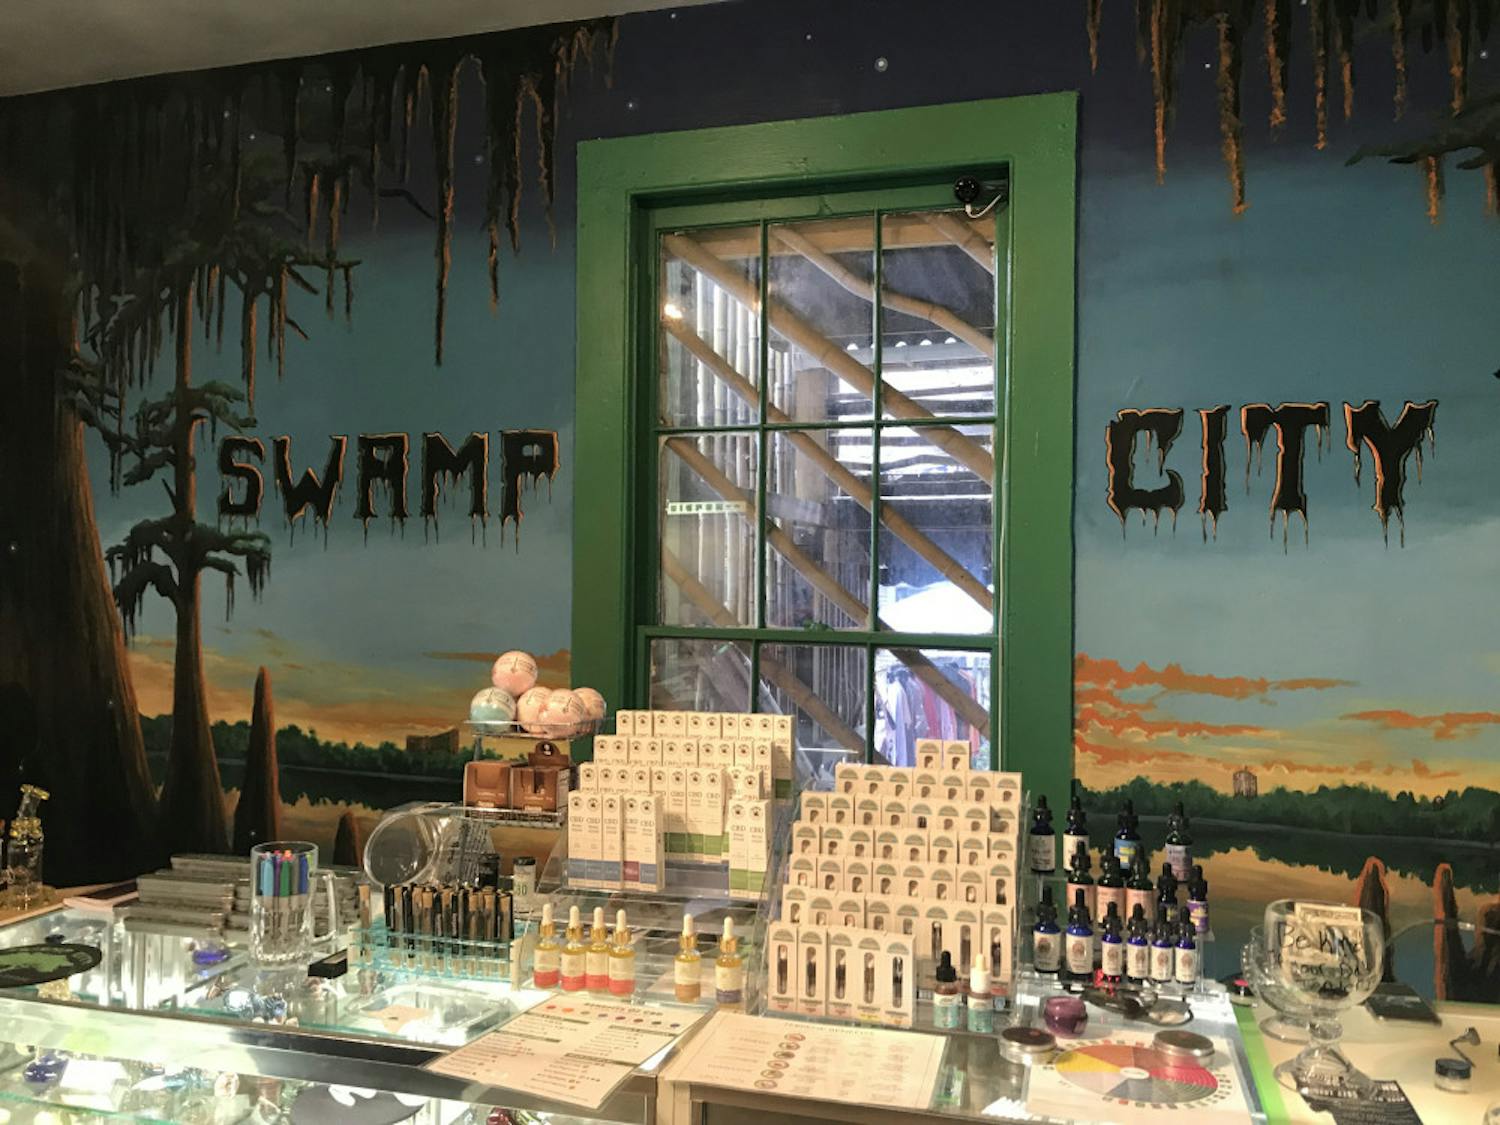 Swamp City Gallery Lounge, which offers CBD products and craft beer, opened on Saturday.